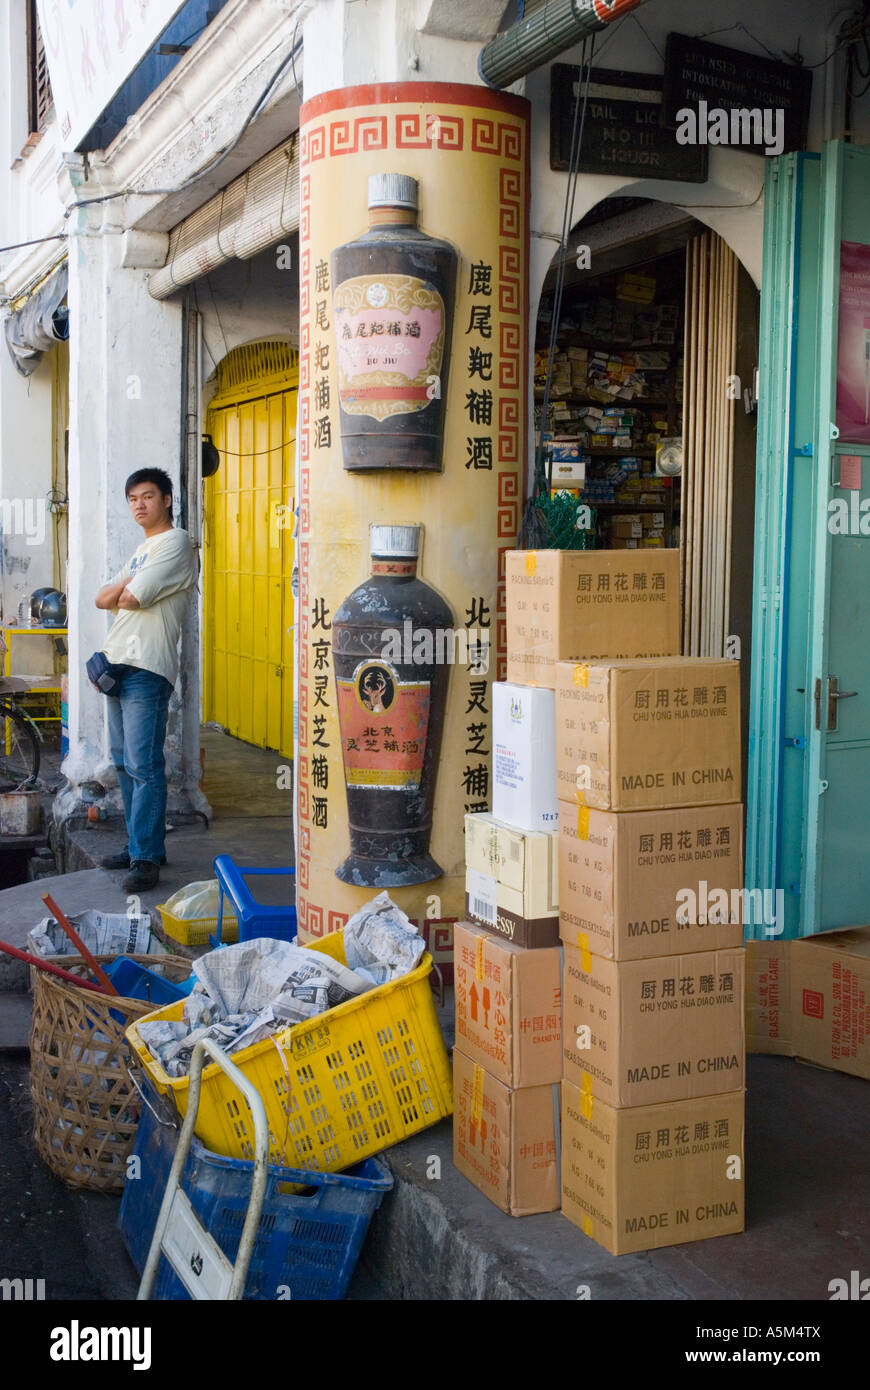 https://c8.alamy.com/comp/A5M4TX/boxes-of-products-made-in-china-stacked-on-the-pavement-outside-a-A5M4TX.jpg